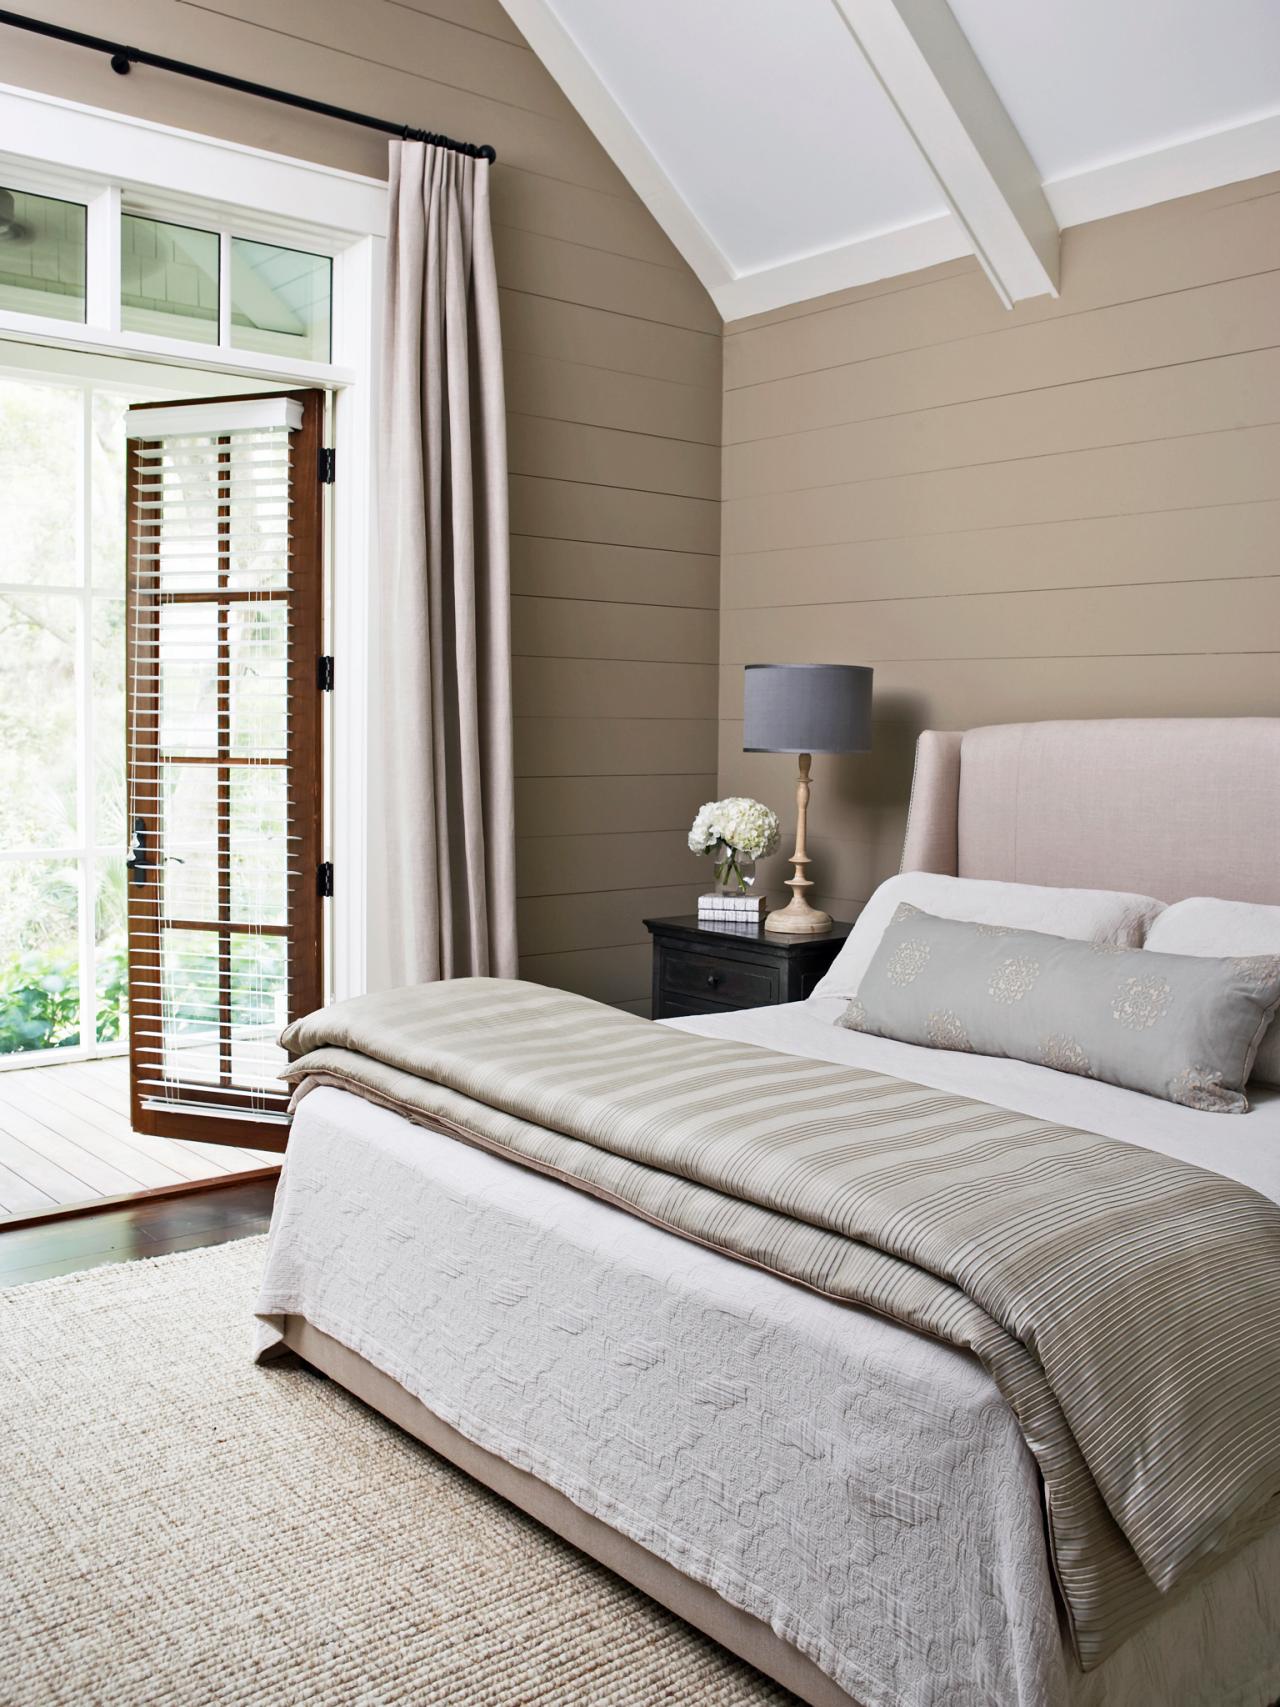 small bedroom decoration 9: add horizontal wooden planks to the walls.  small neutral bedroom ... CSTWQIZ